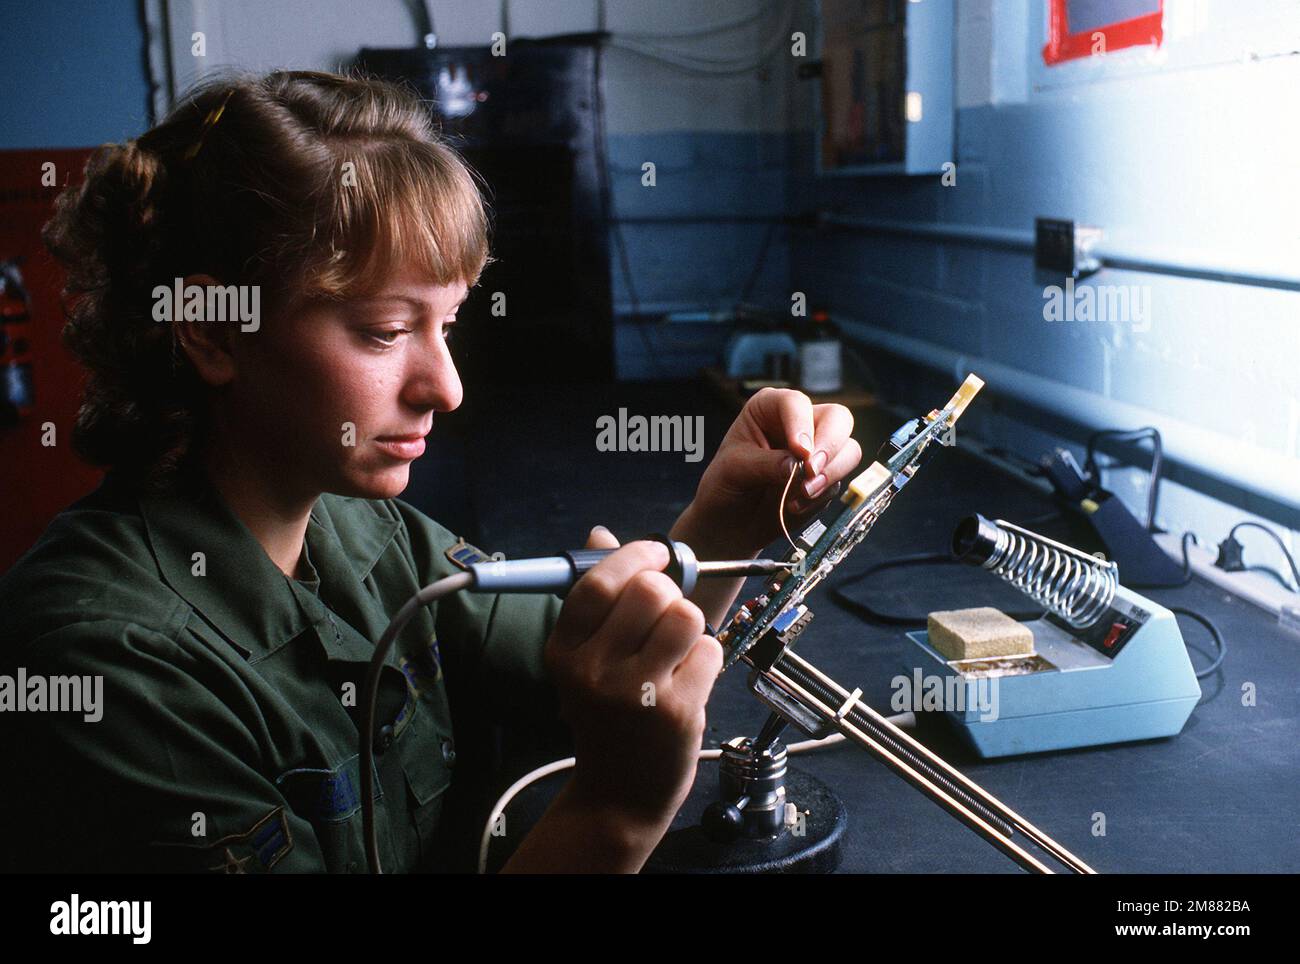 AIRMAN 1ST Class Julie Berry, a ground radio communications specialist of the 2006th Information Systems Group, solders a resistor on a channel A IF card at the ground radio maintenance shop. Base: Incirlik Air Base, Adana Country: Turkey (TUR) Stock Photo